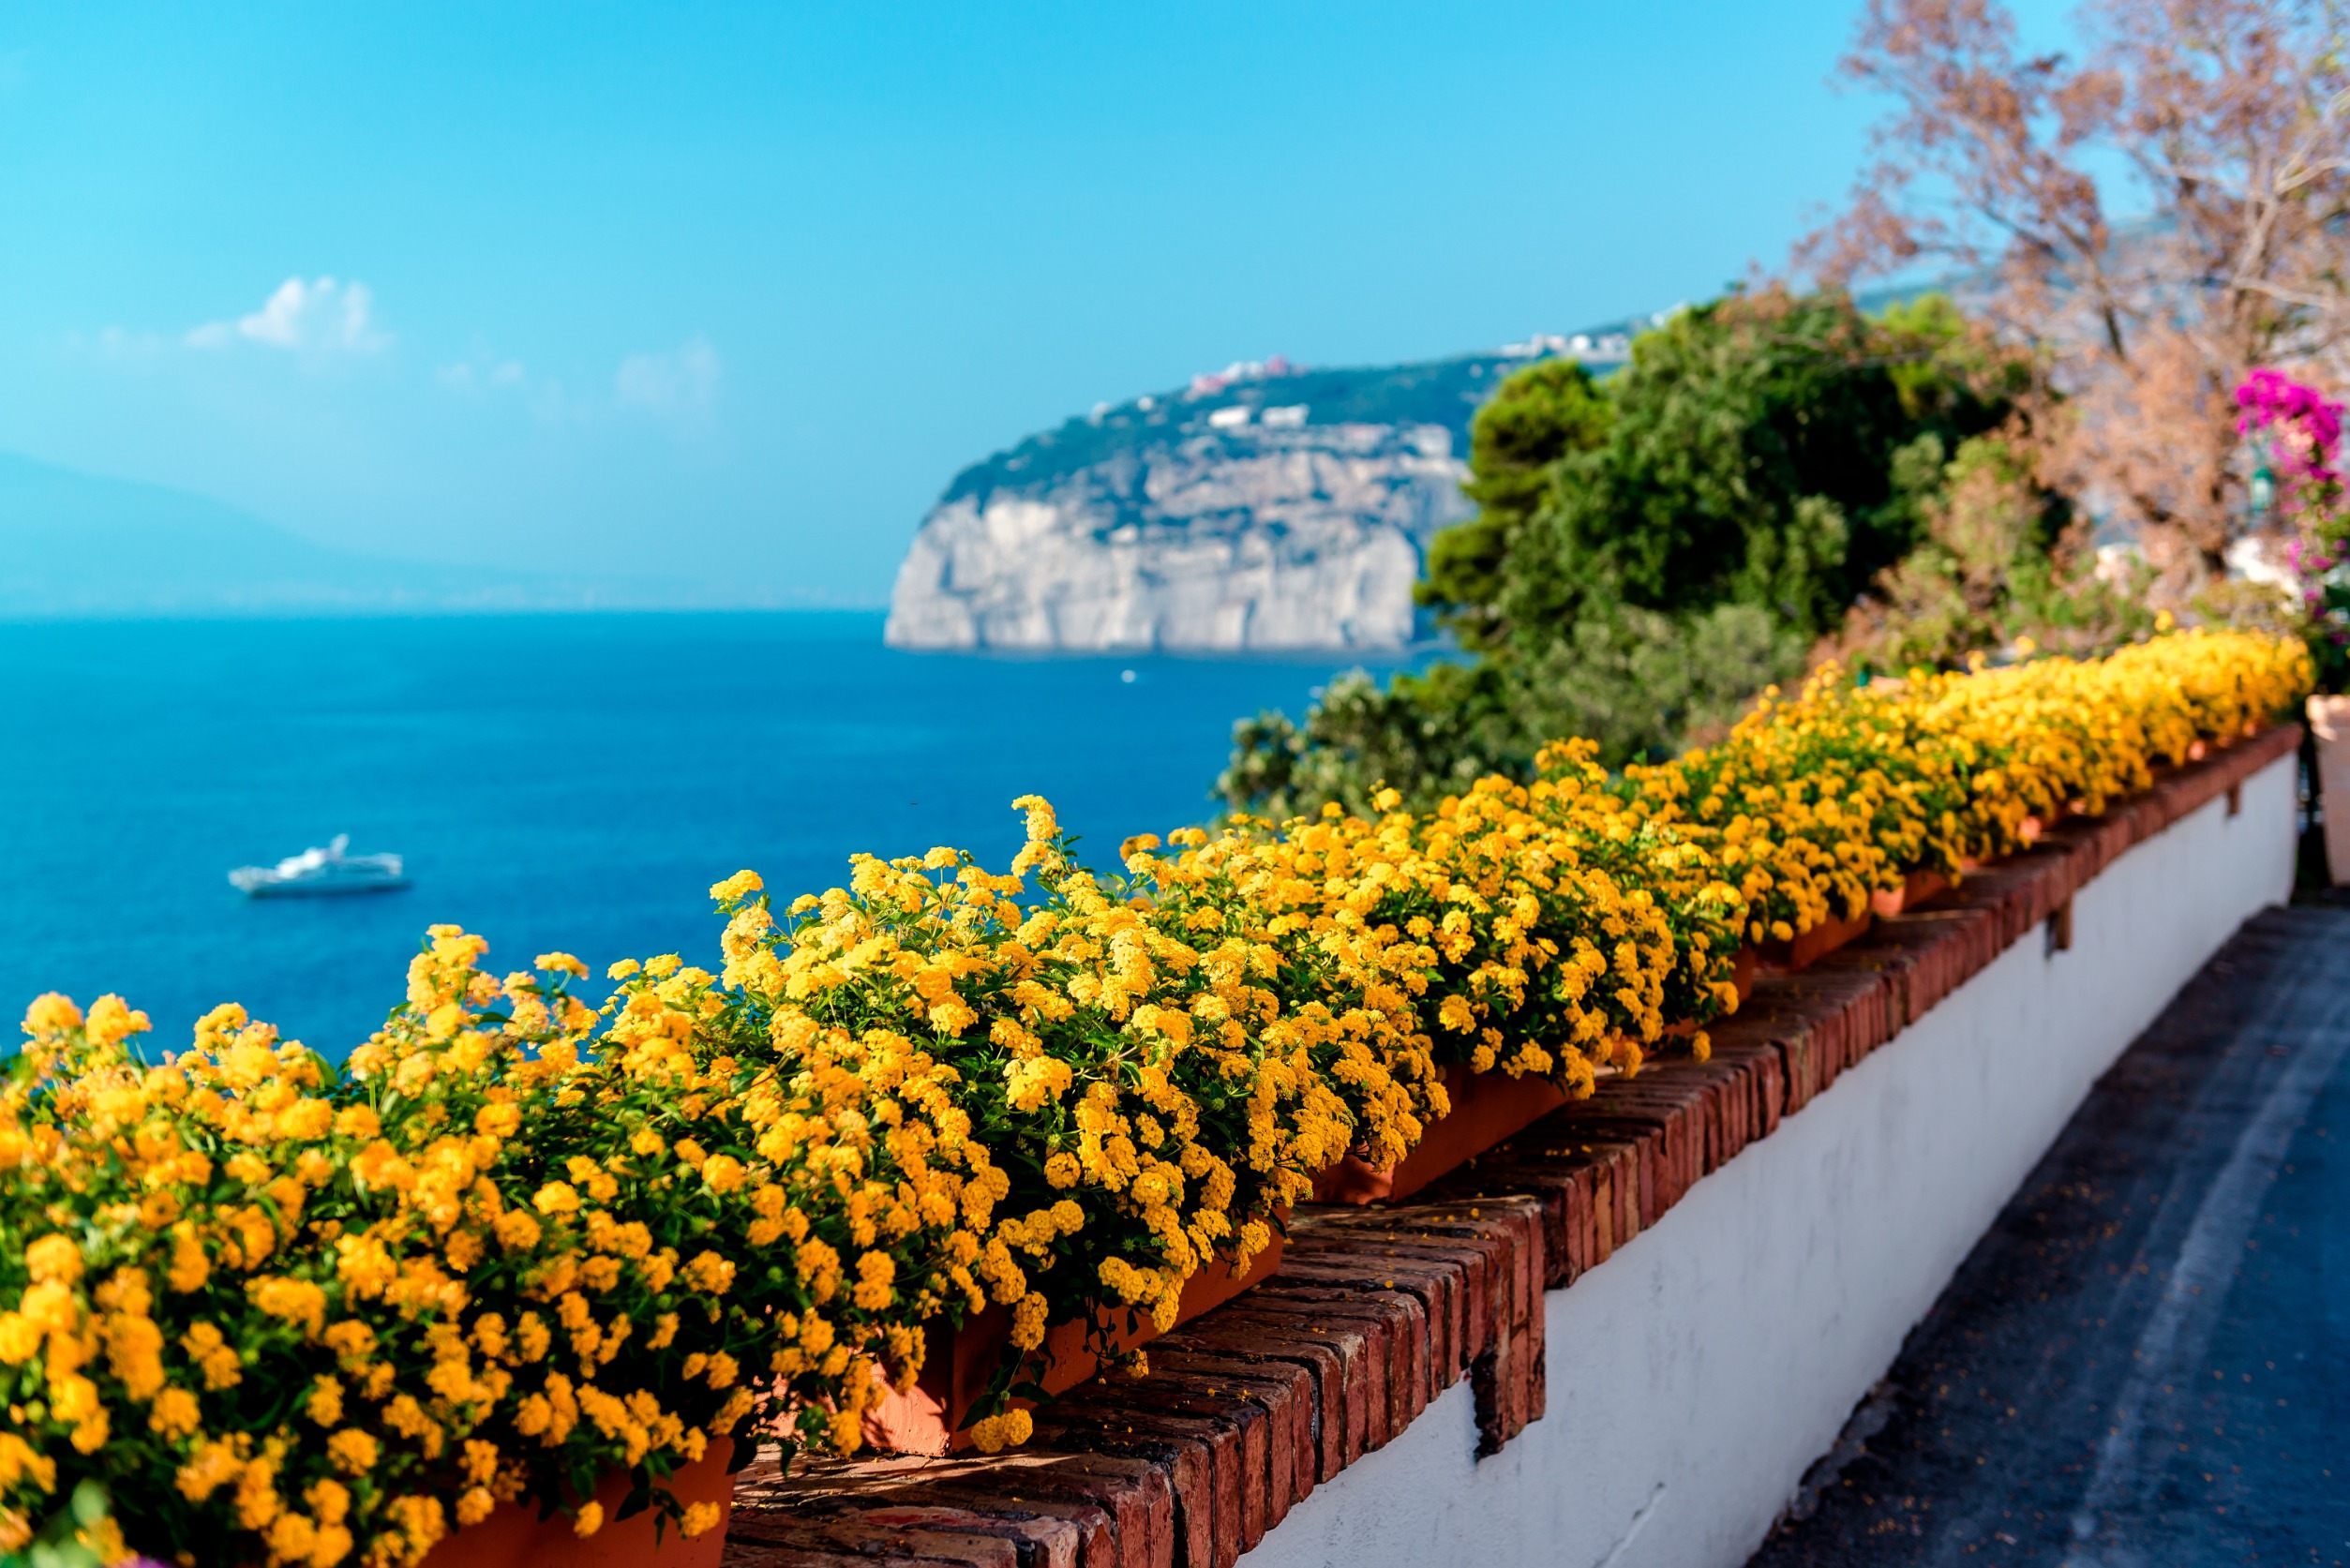 When Is The Best Time To Visit The Amalfi Coast In Italy?